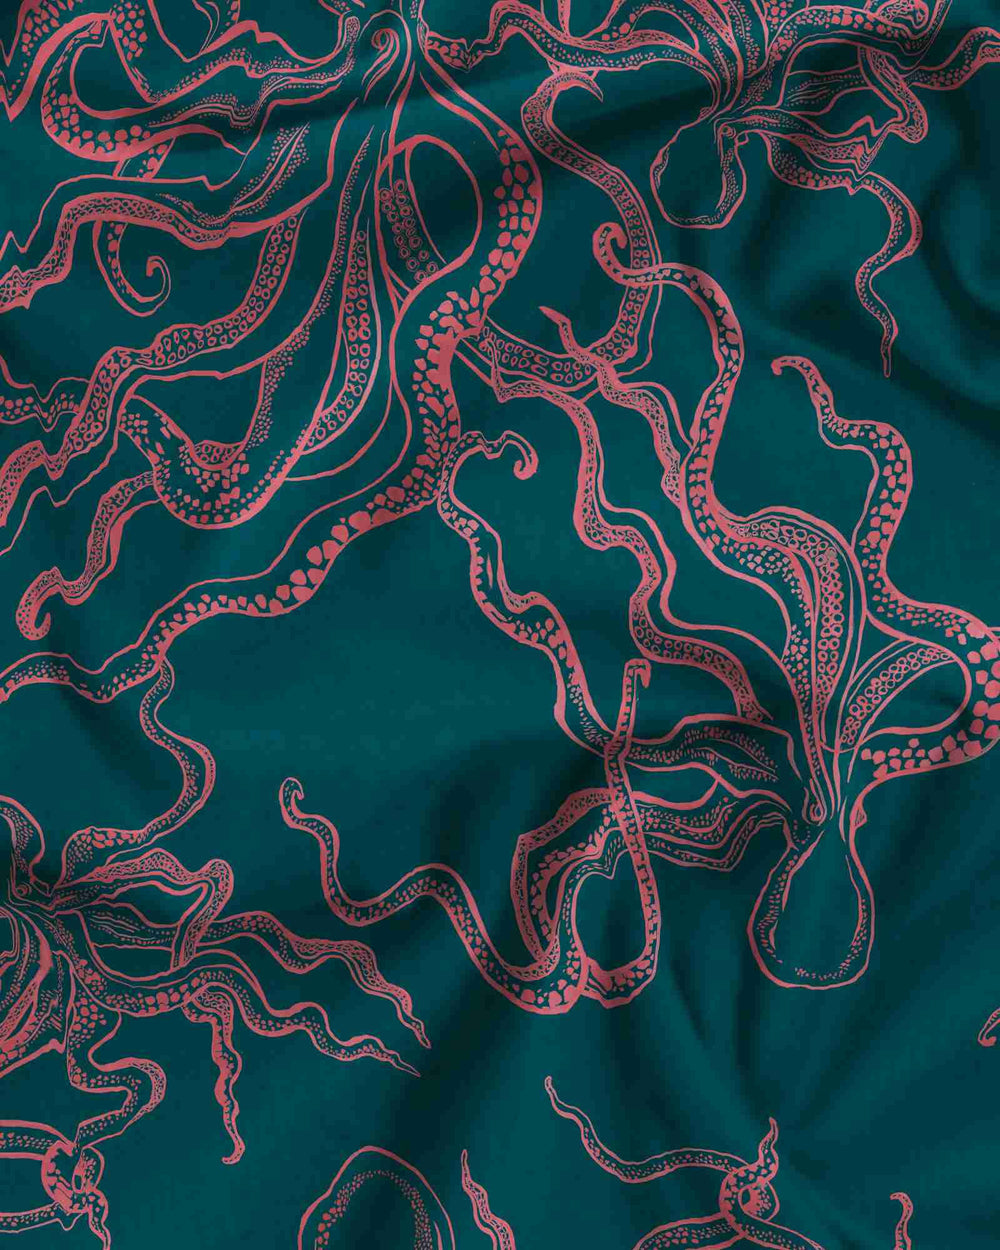 Women's sexy cotton nighty - Octopus pink on turquoise background